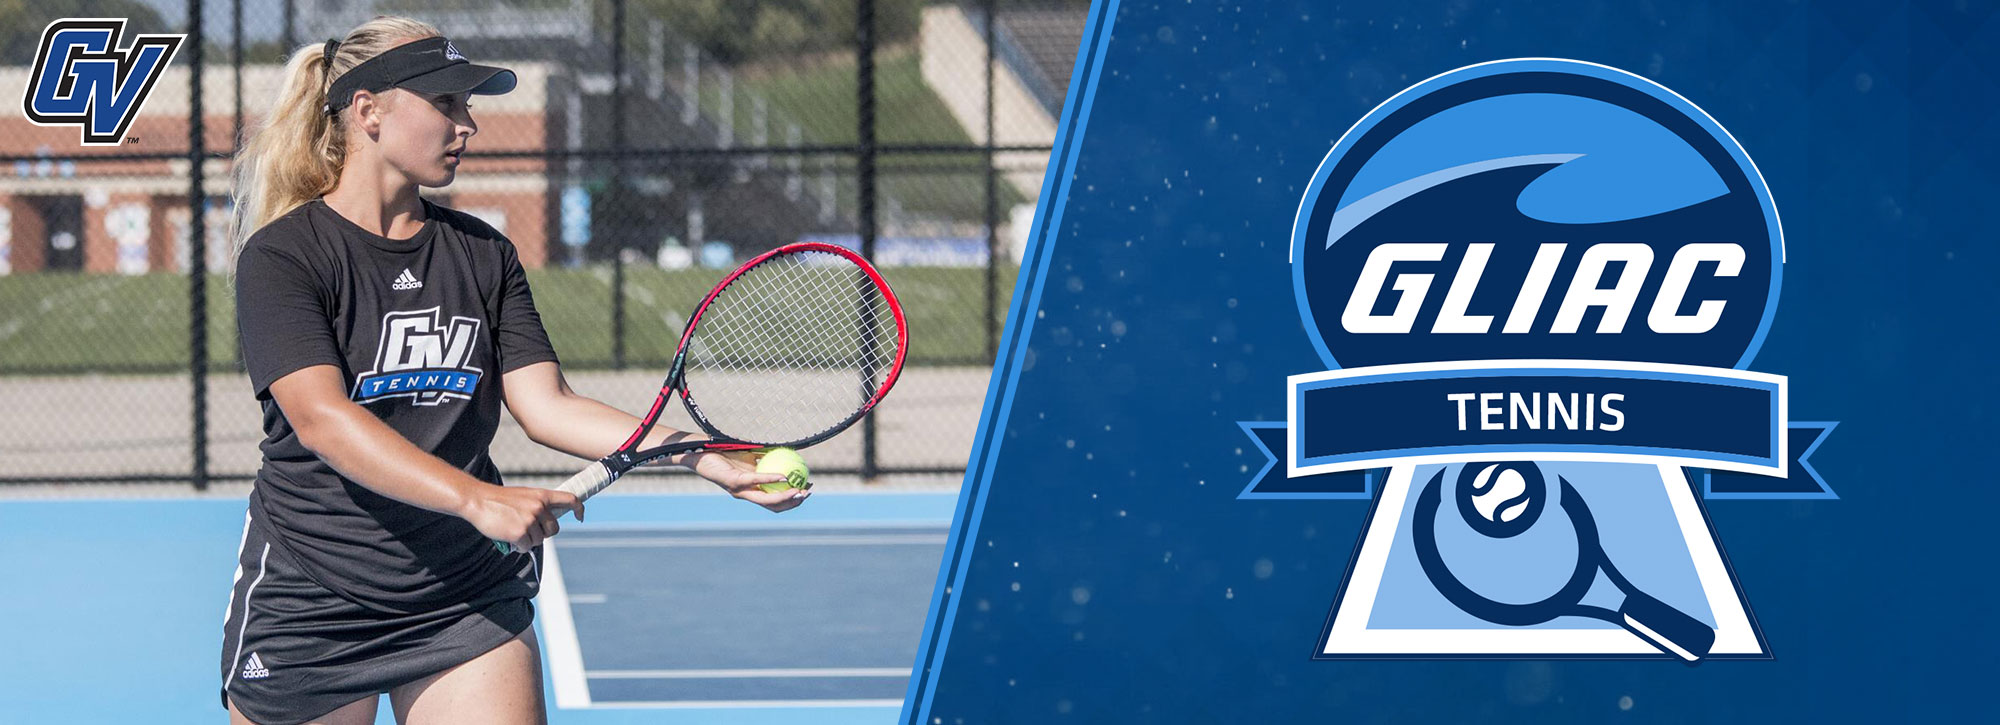 Grand Valley State's Griva Captures GLIAC Women's Tennis Player of the Week Honors